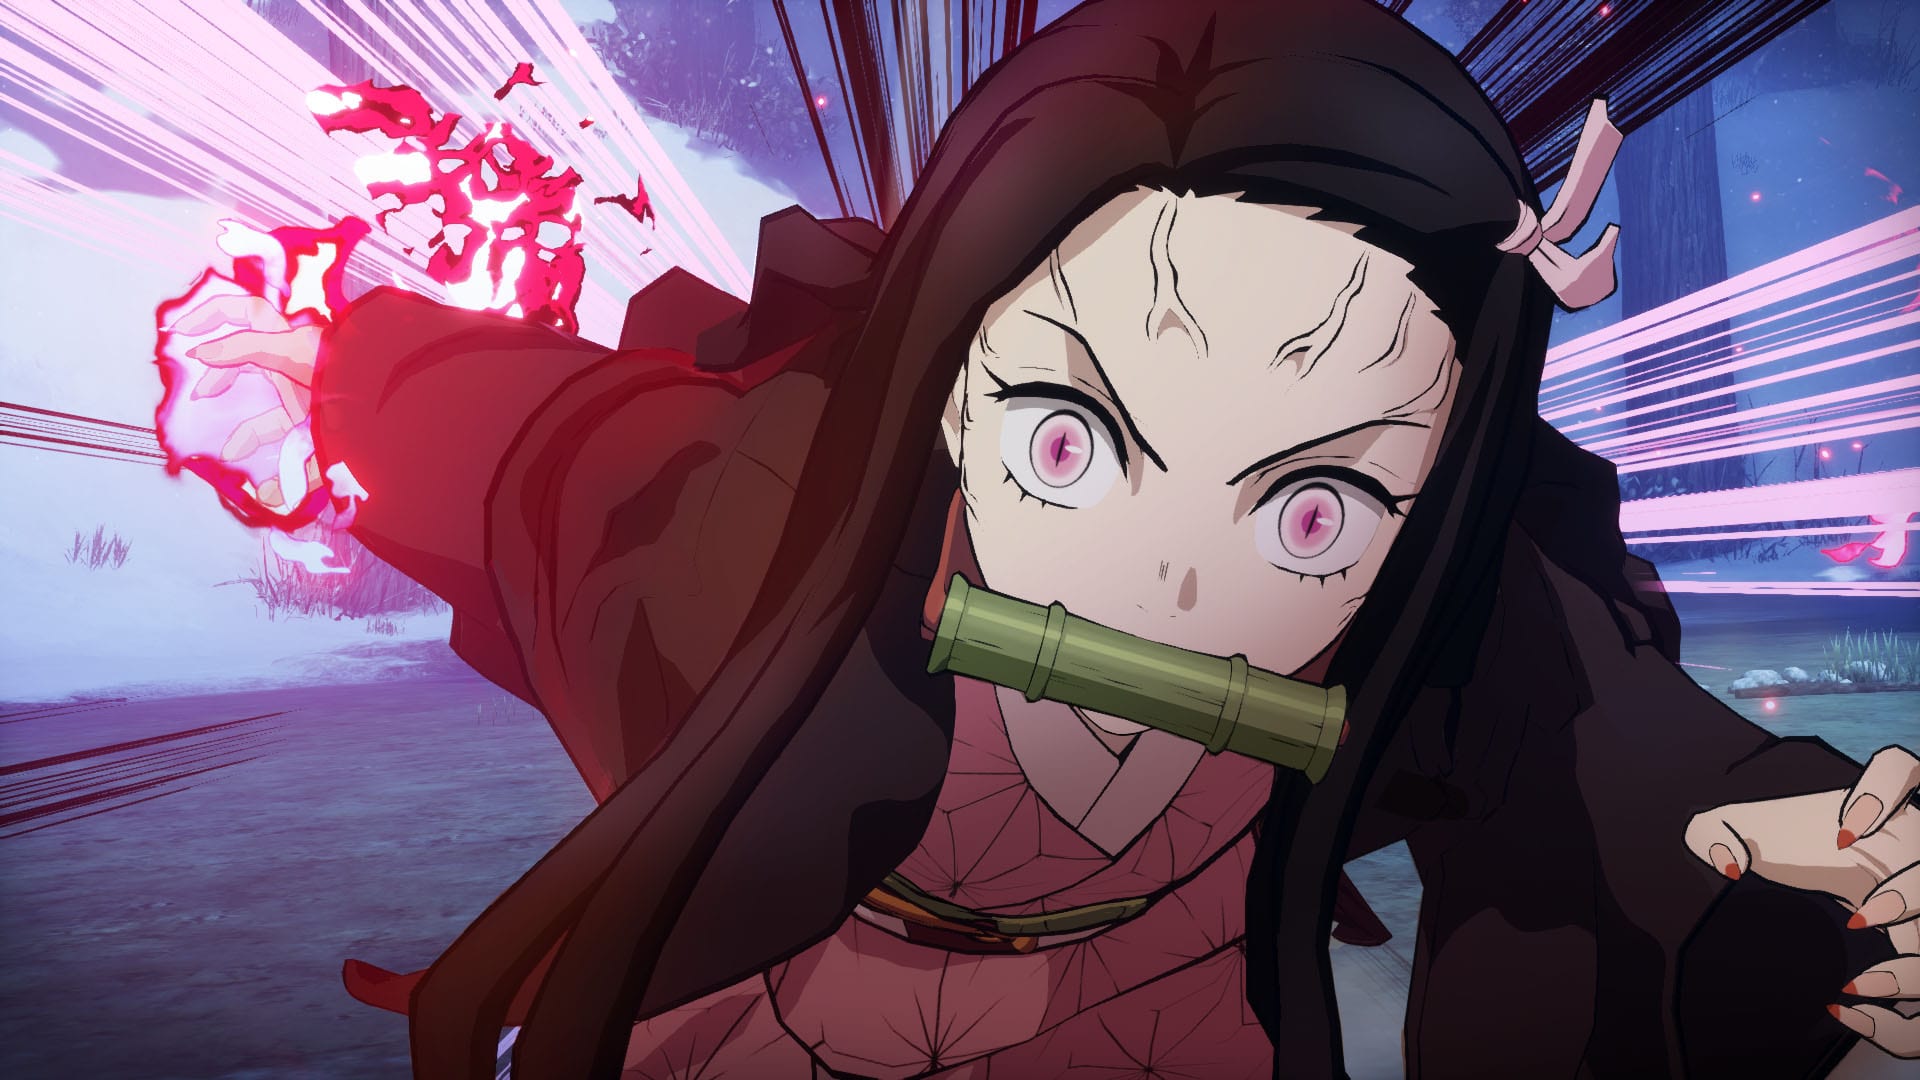 Demon Slayer Game for PS Xbox Series X, PC, & More Gets First Gameplay; New Anime Season Announced